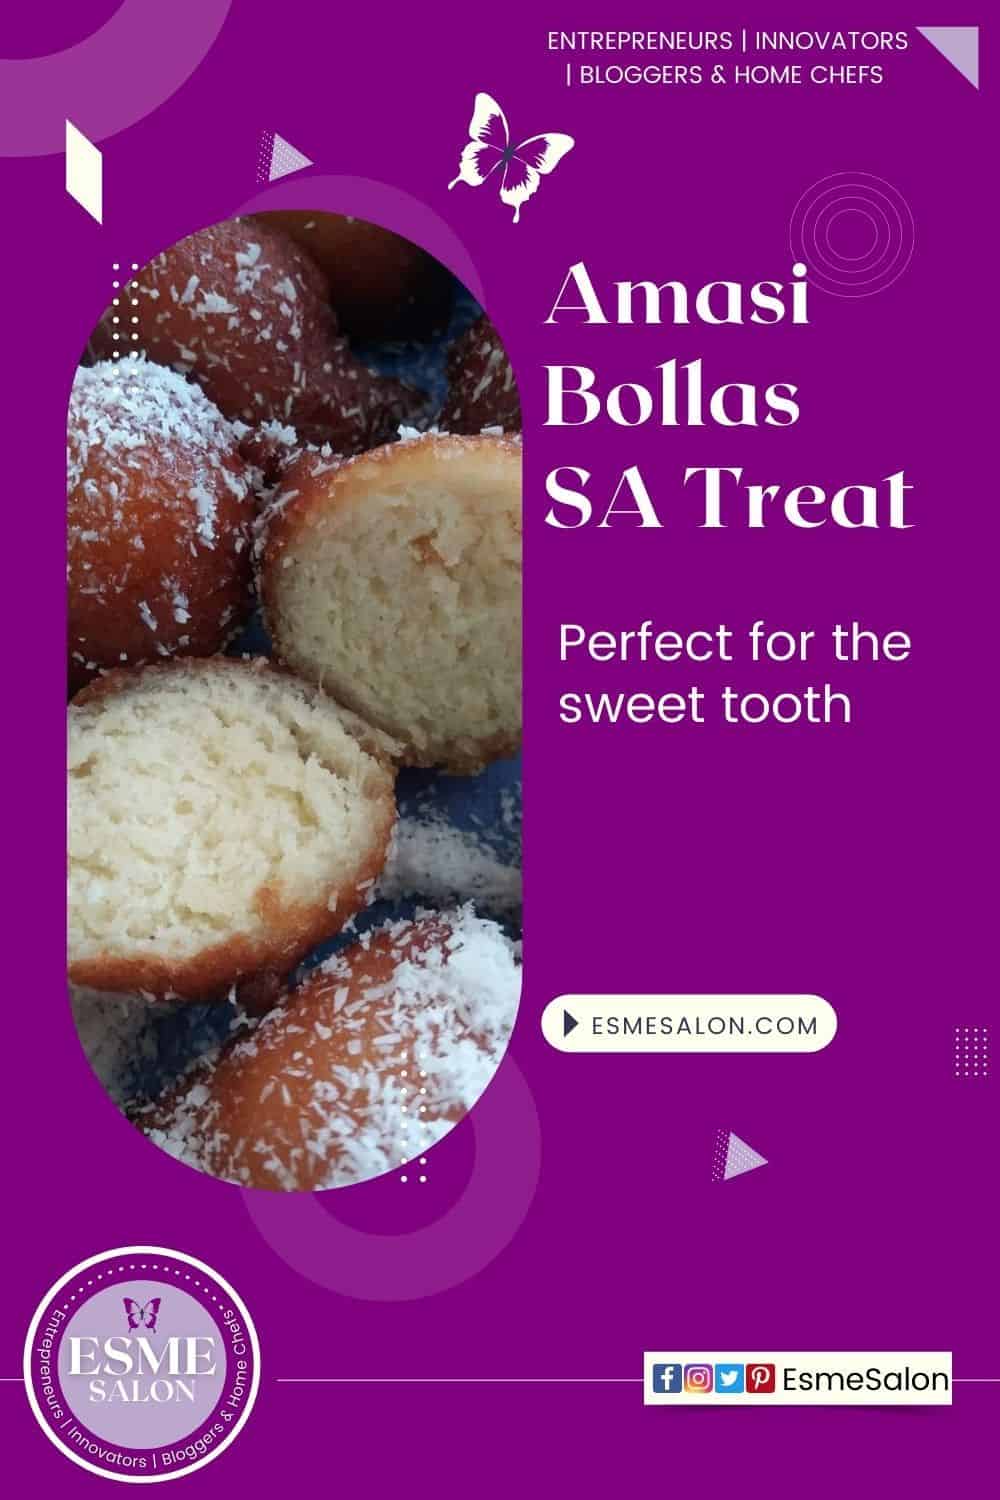 Amasi Bollas, a traditional South African Sweet treat dunked in a sweet syrup and covered in coconut